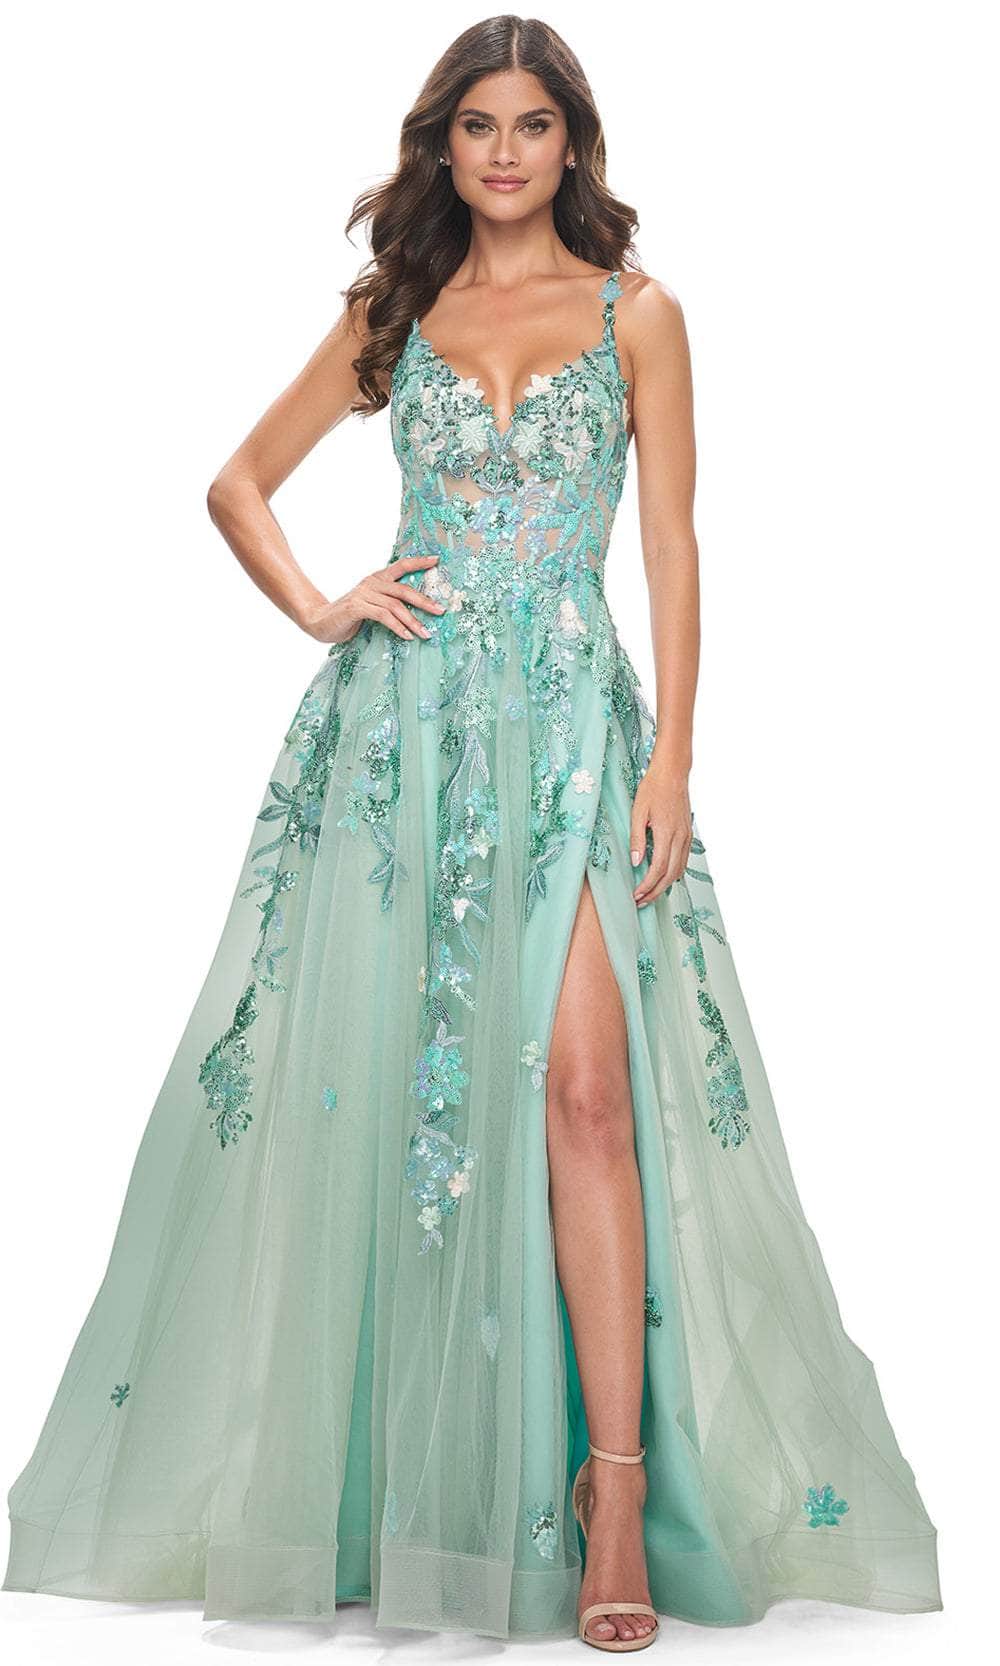 Image of La Femme 32347 - Sleeveless Lace Applique Prom Gown